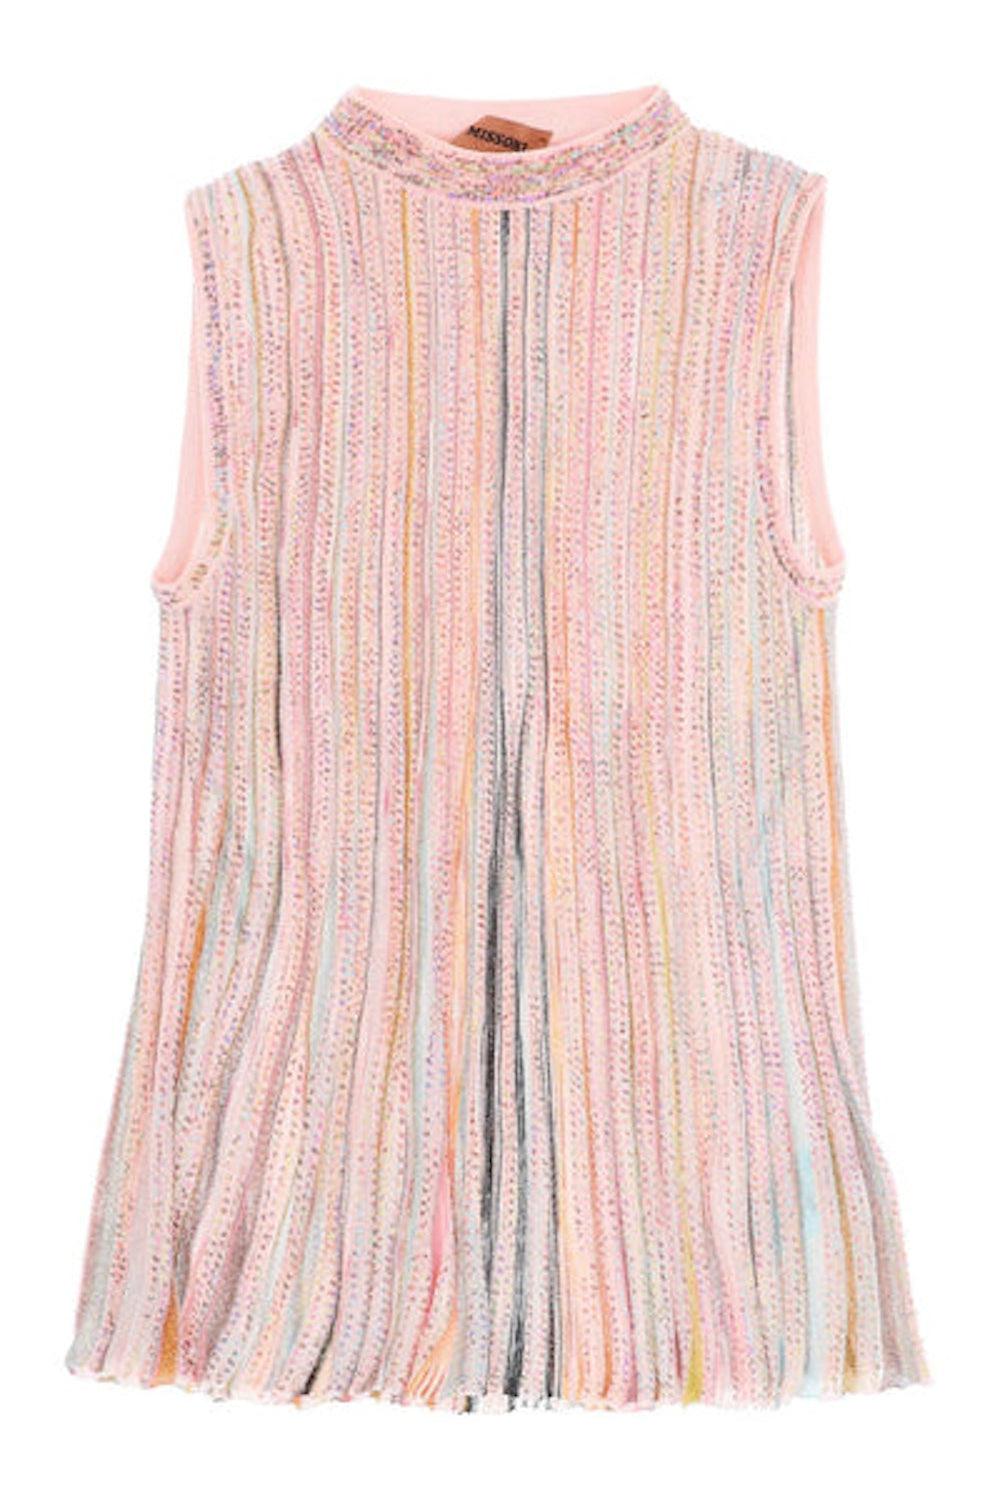 Cotton sleeveless top with sequins-Top-Missoni-Debs Boutique